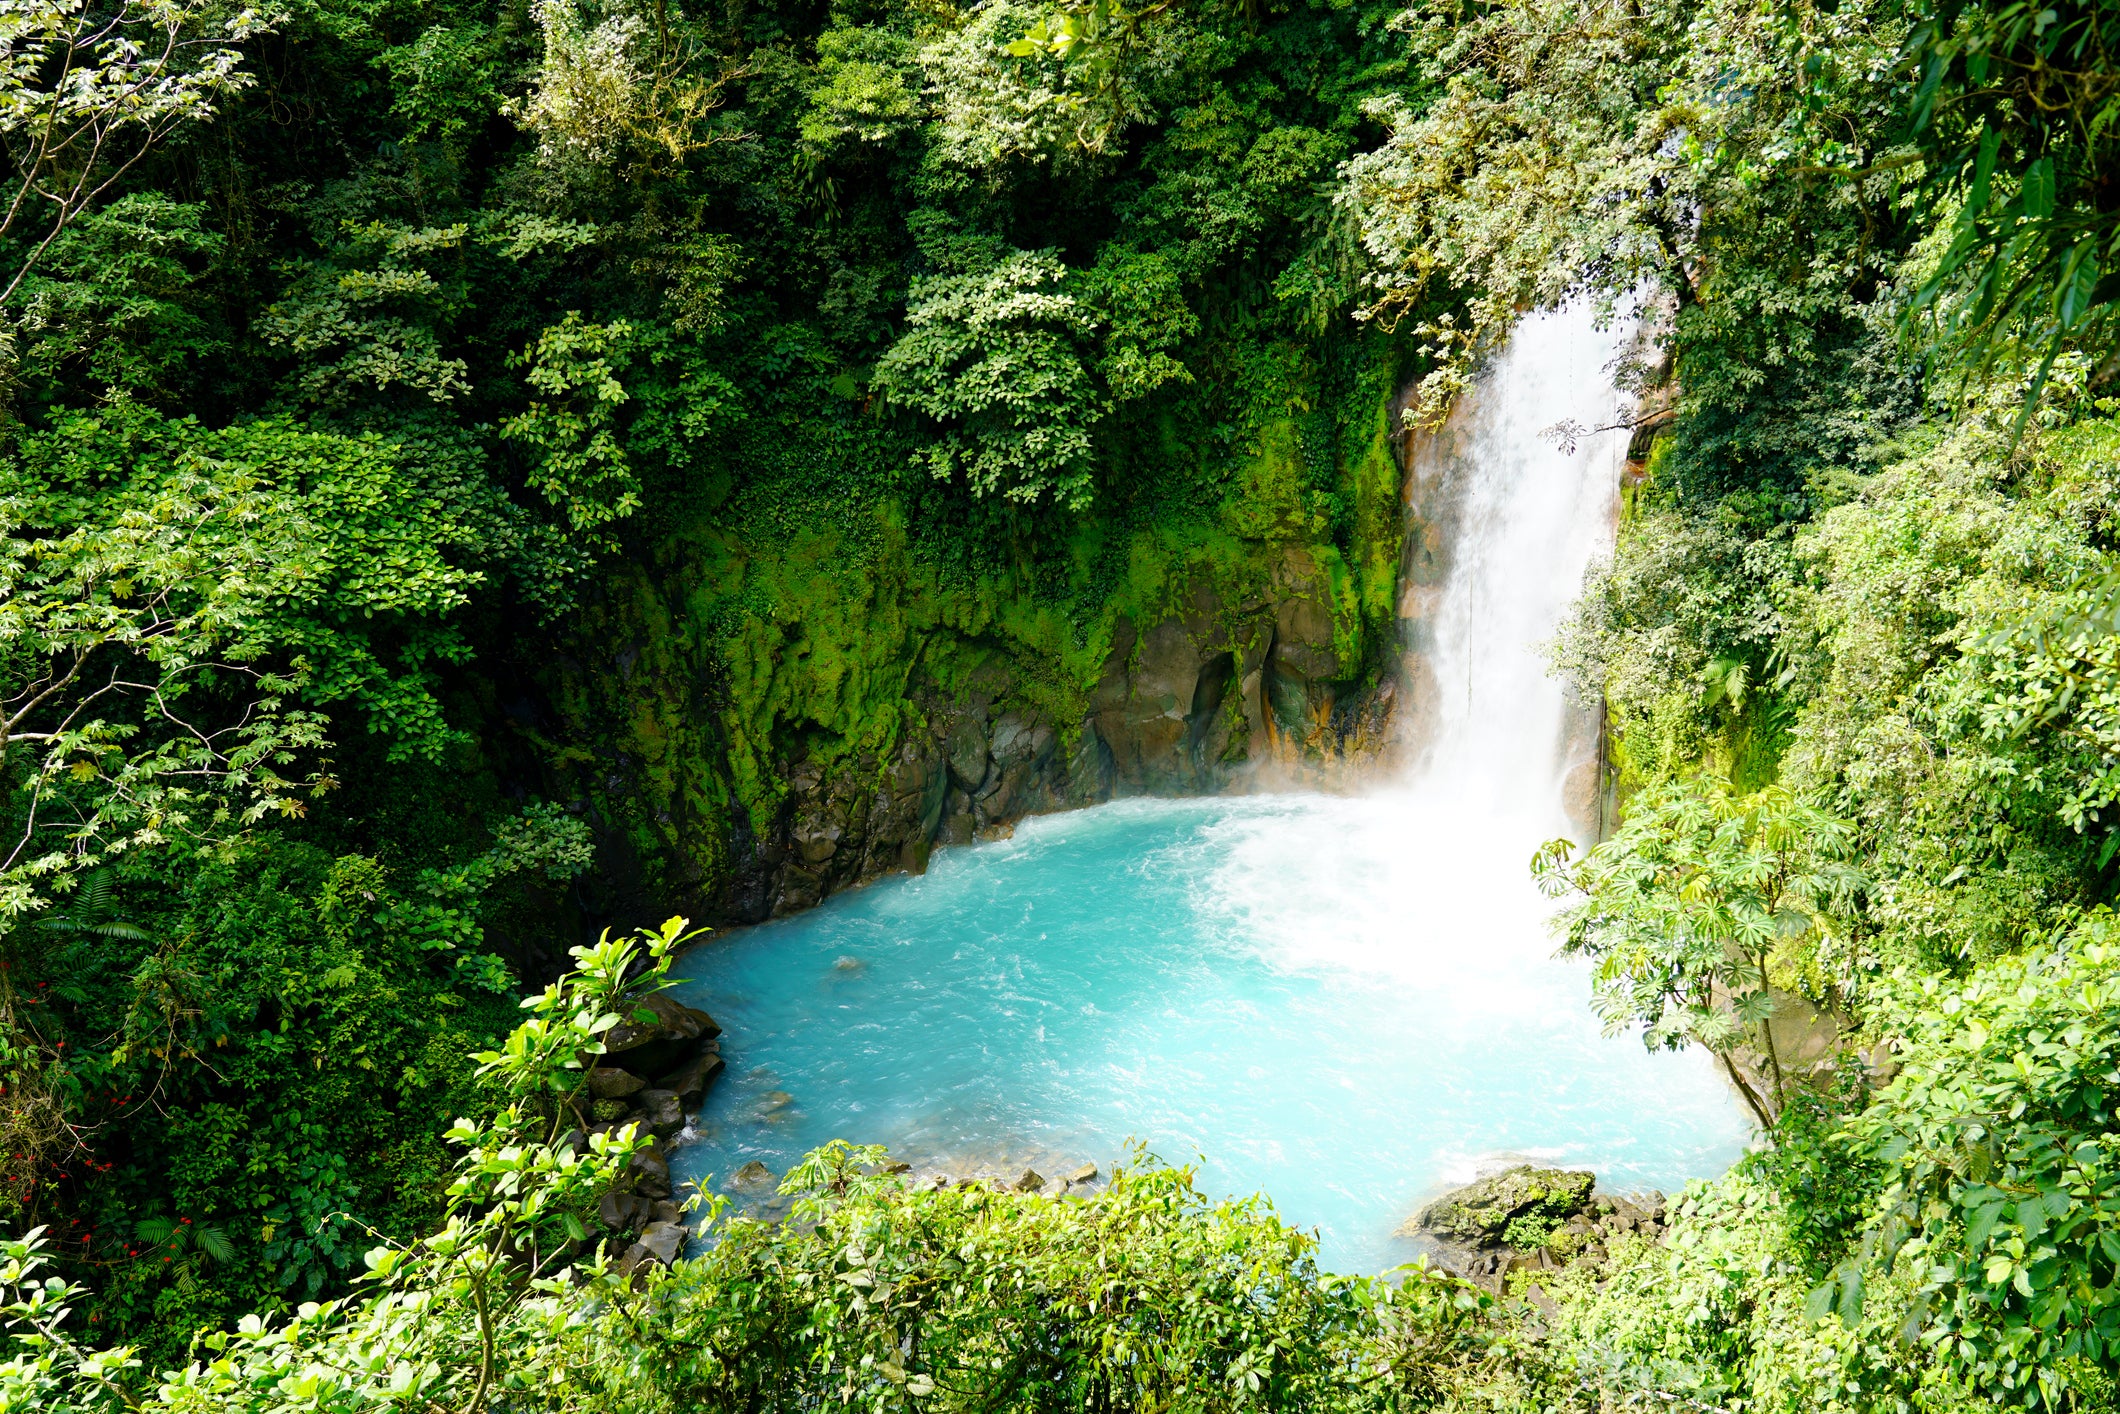 Heal, Pray, Love: How To Plan The Costa Rica Vacation Of Your Dreams